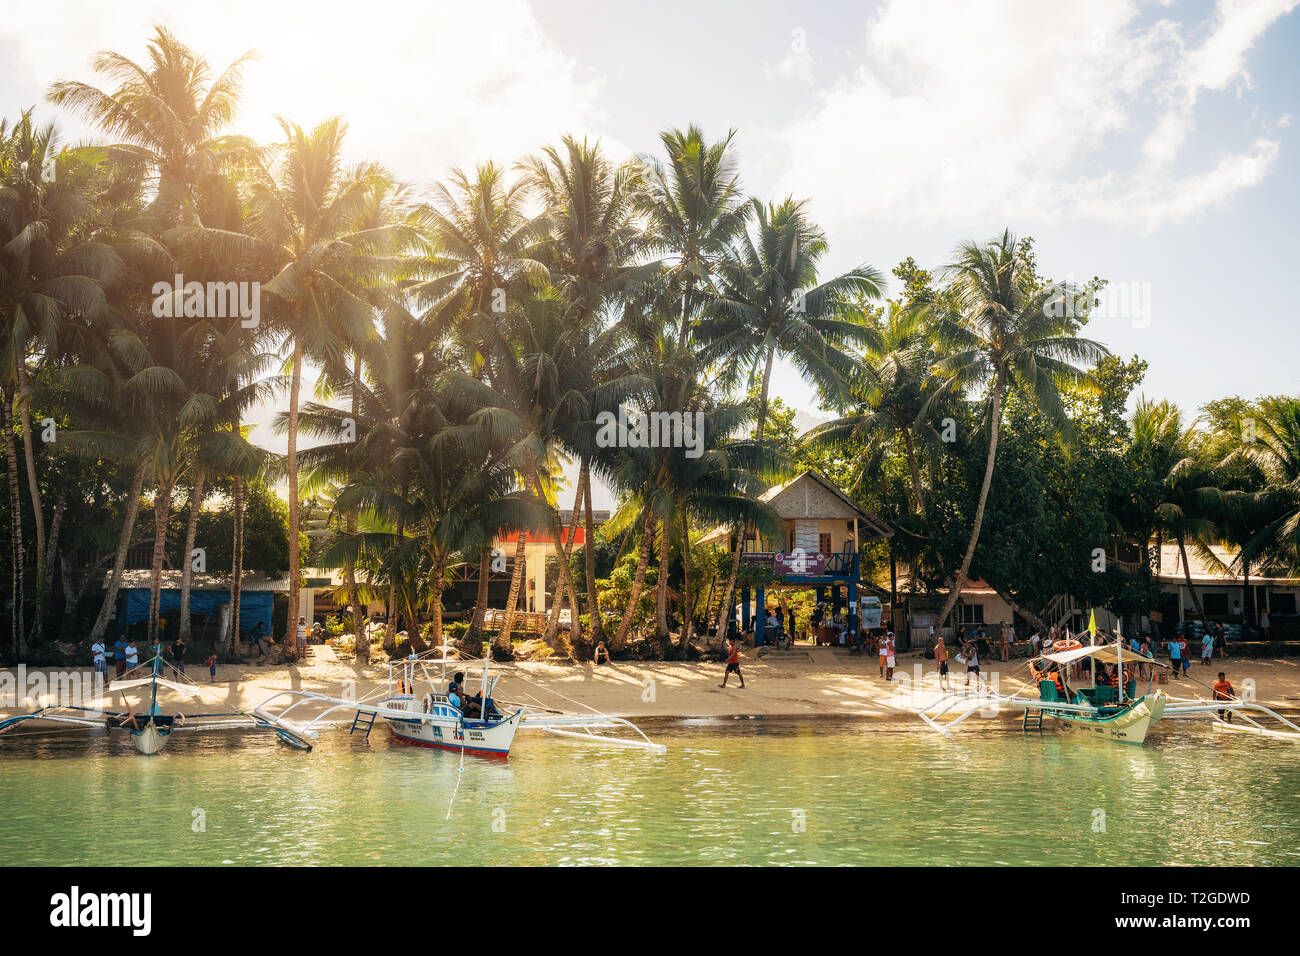 Port Barton, Palawan, Philippines - February 4, 2019: People on tropical beach with trees. Traditional boats in water Stock Photo